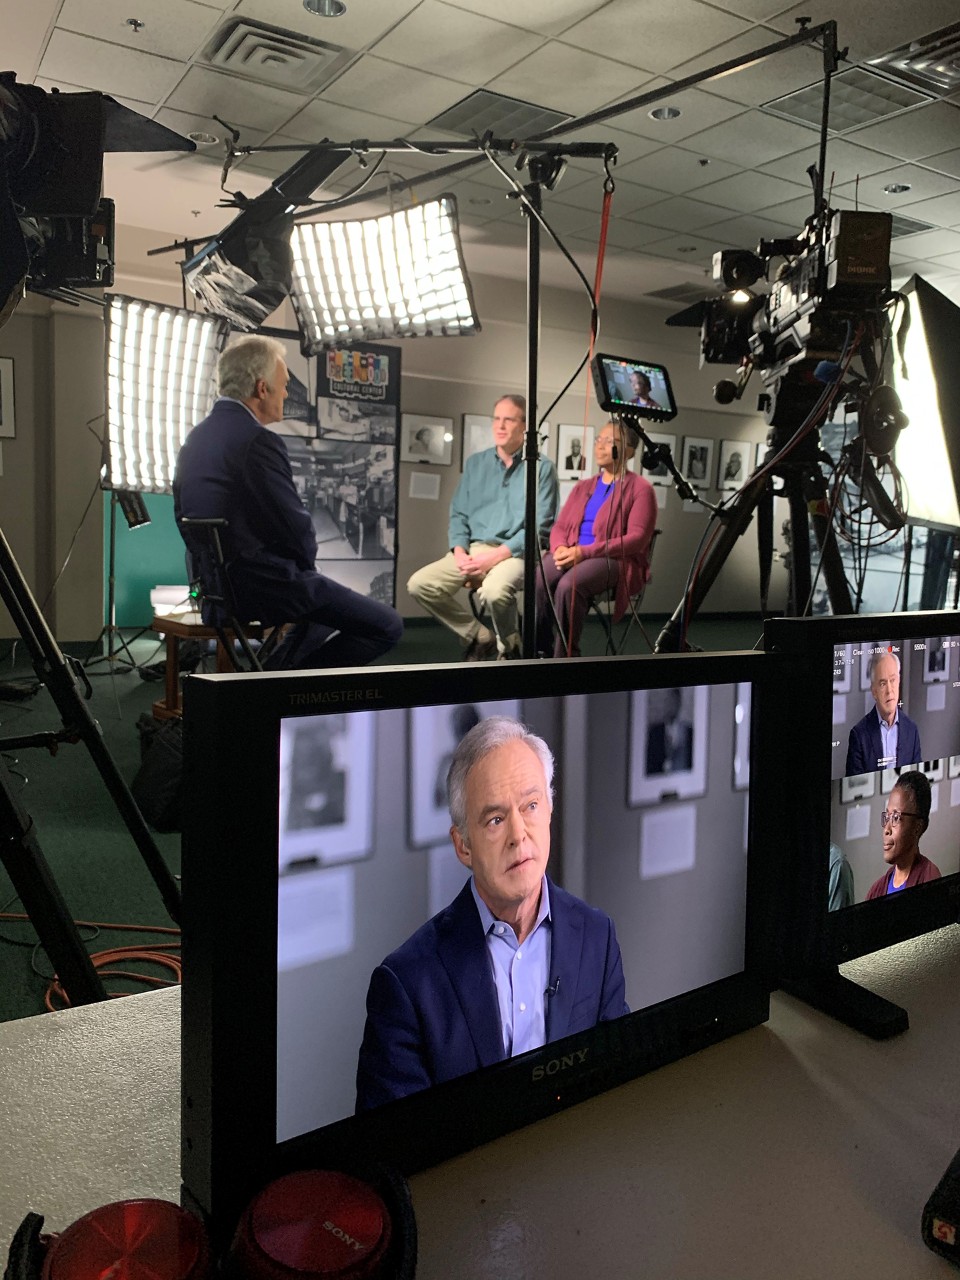 Scott Hammerstedt and Phoebe Stubblefield are interviewed by 60 Minutes’ Scott Pelley